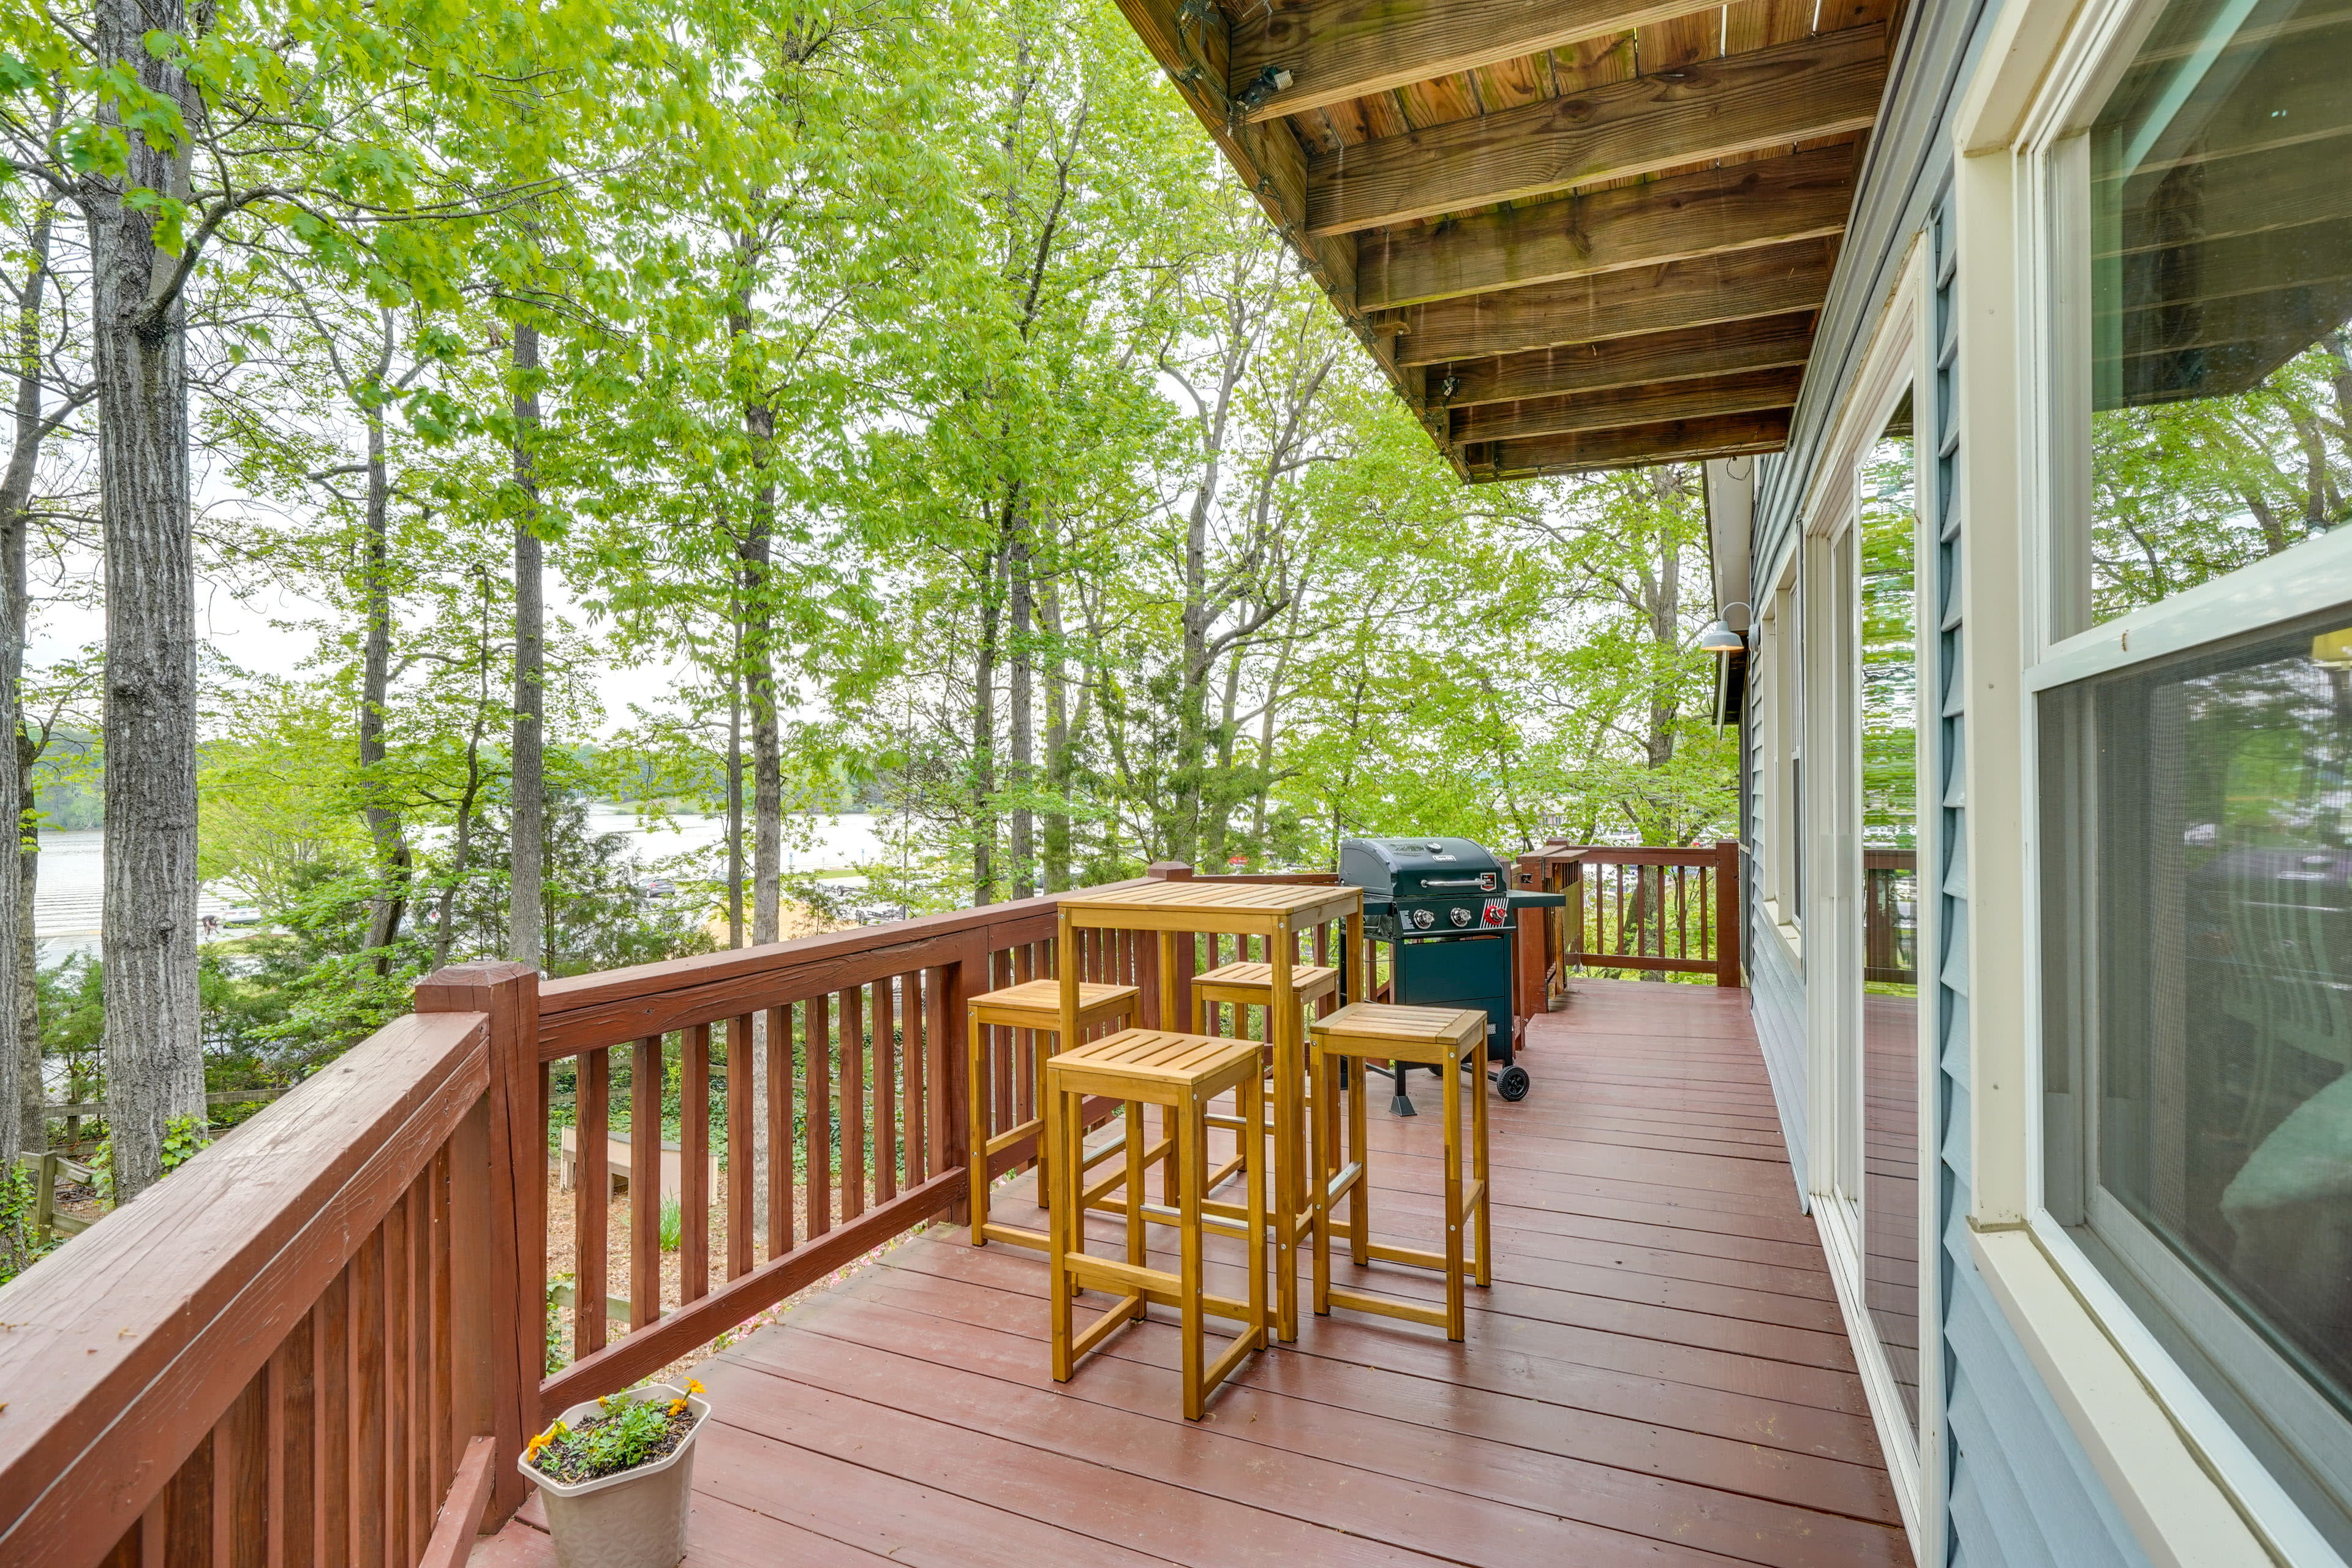 Deck | Gas Grill | Outdoor Seating & Dining